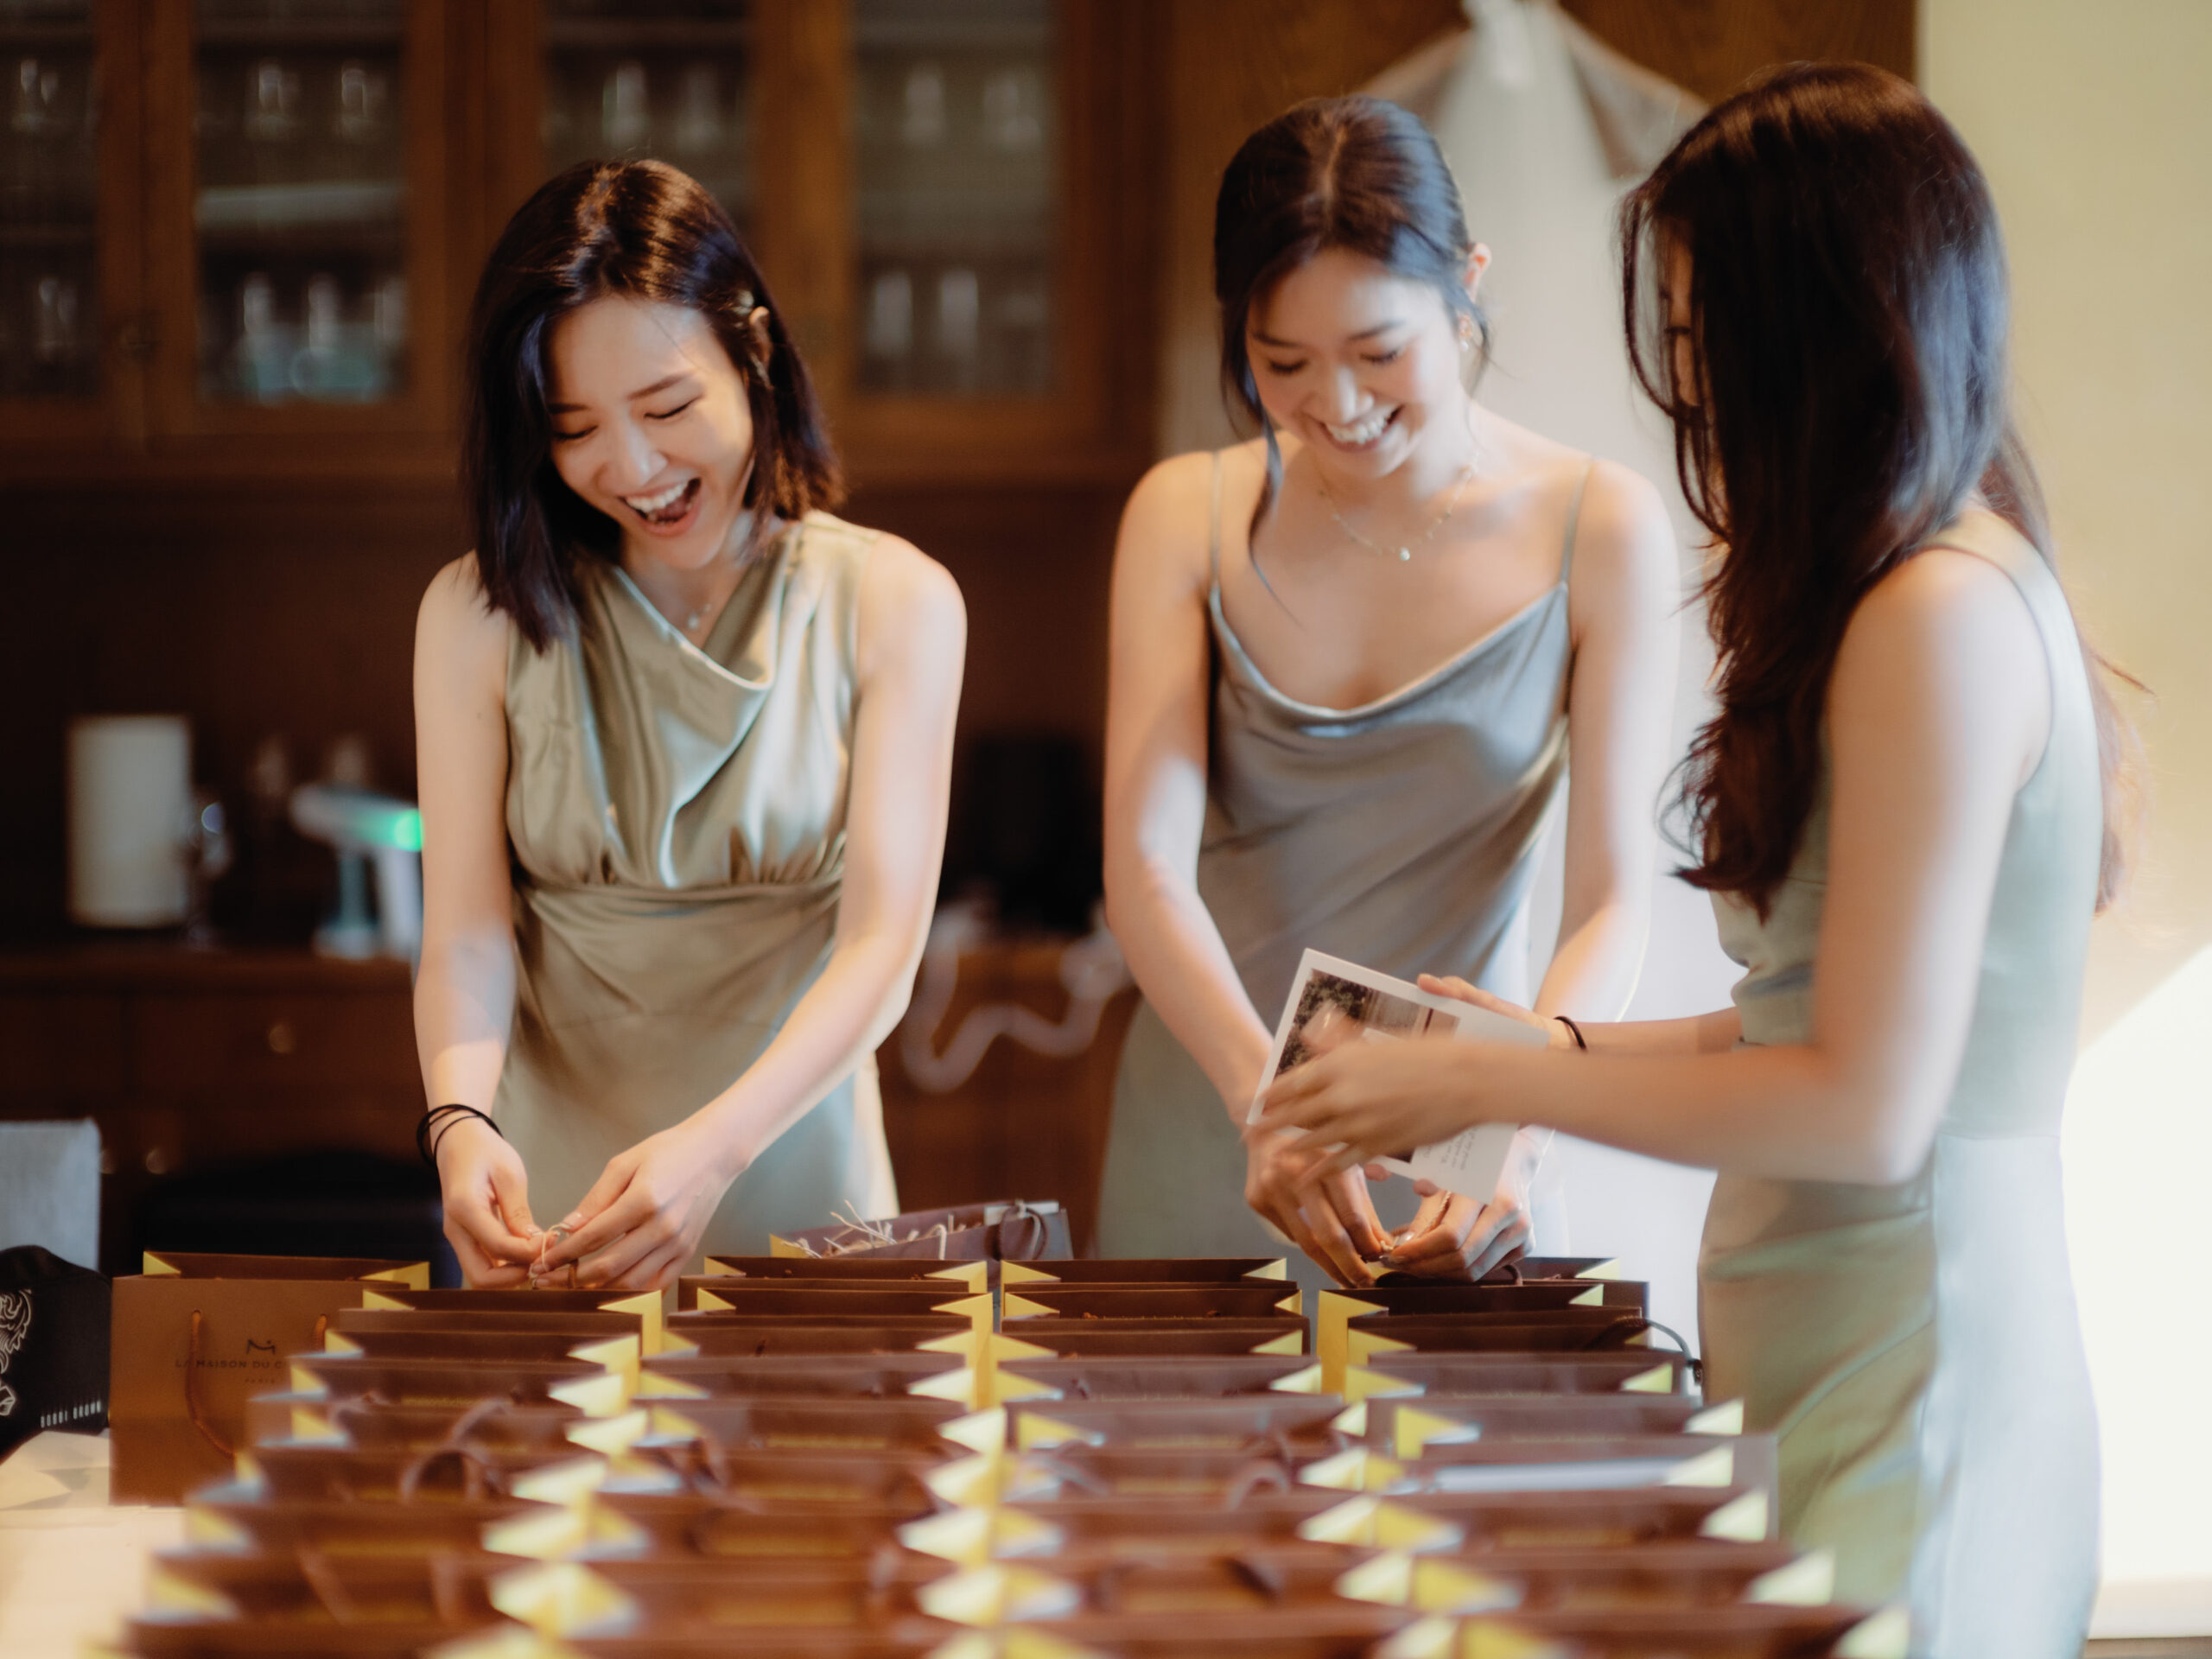 The bridesmaids are happily preparing the wedding favors. Candid wedding photography image by Jenny Fu Studio